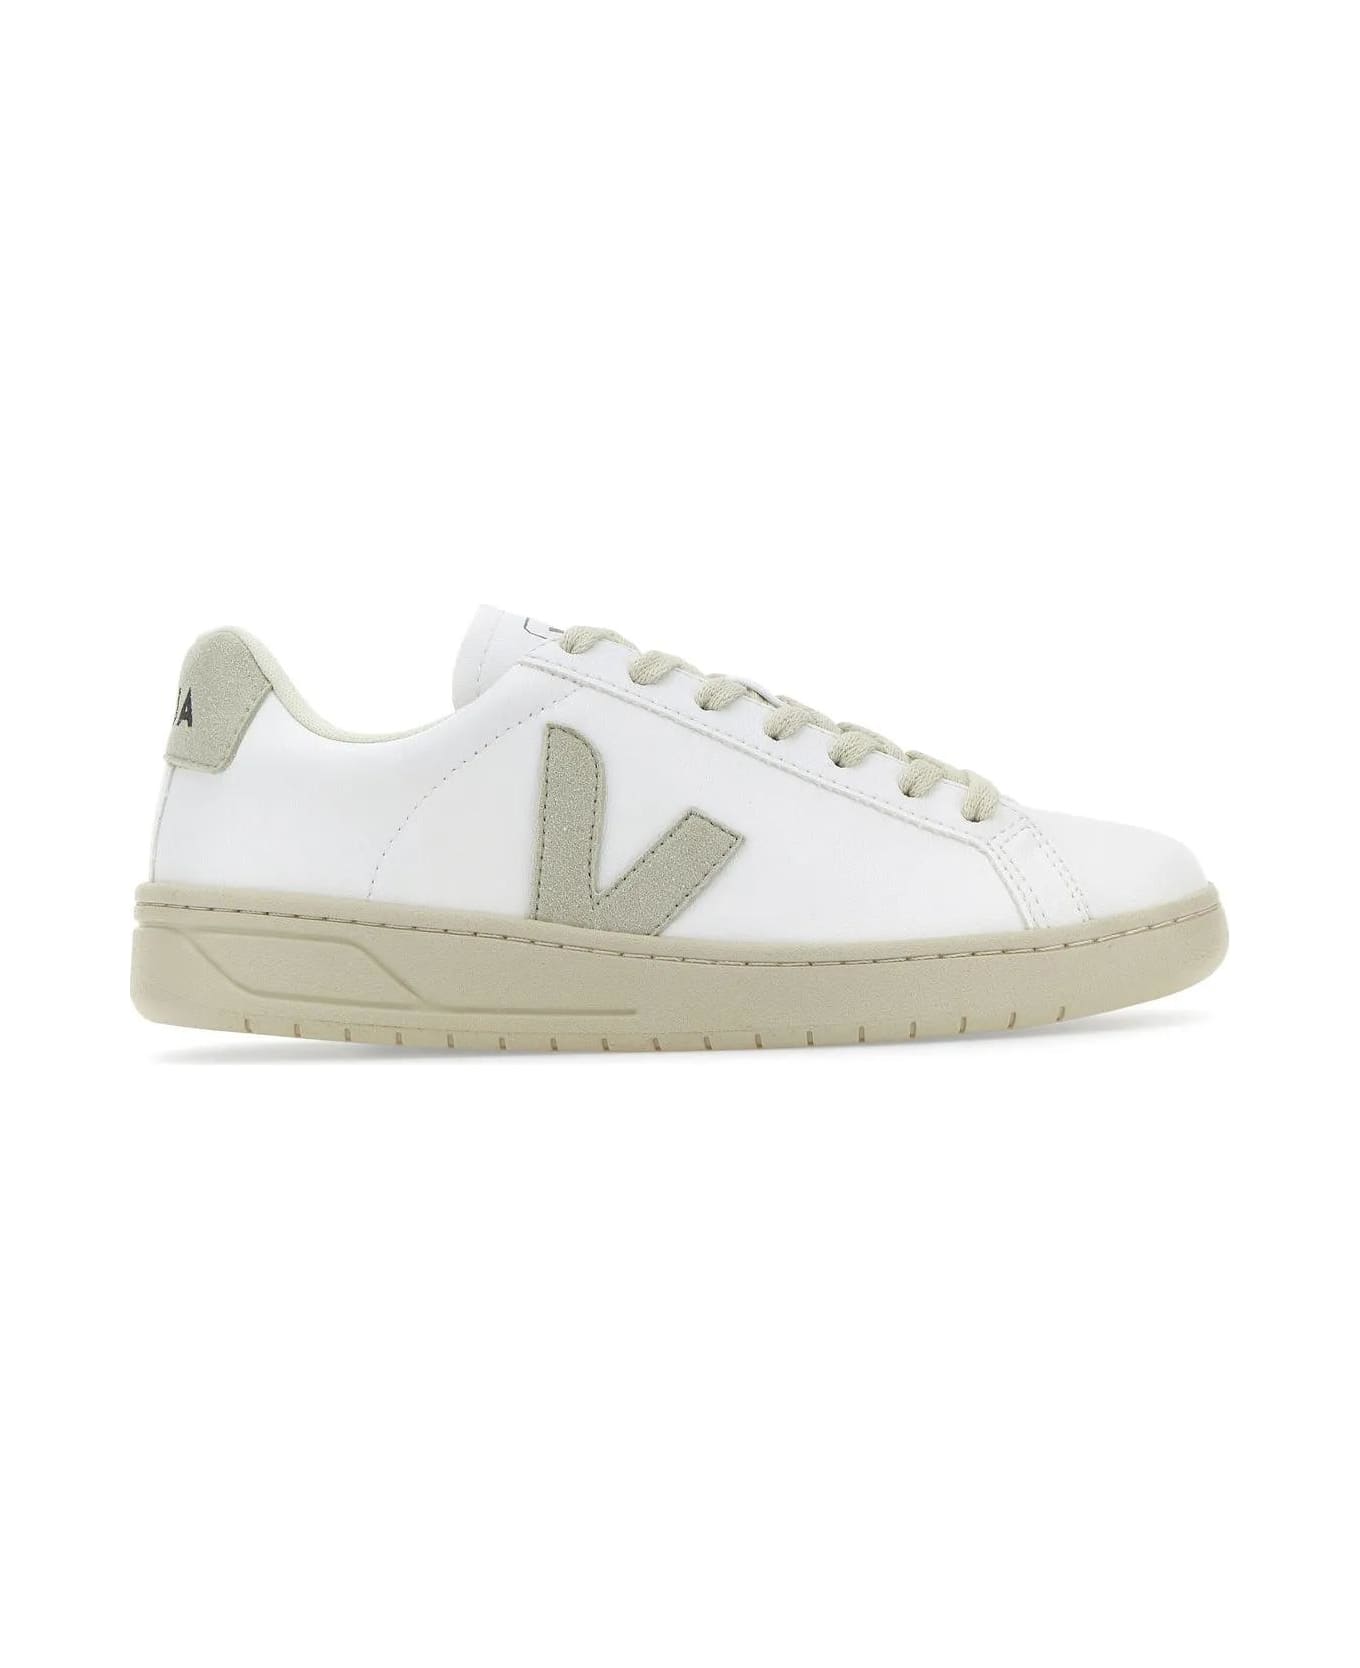 Veja White Synthetic Leather Urca Sneakers - Bianco